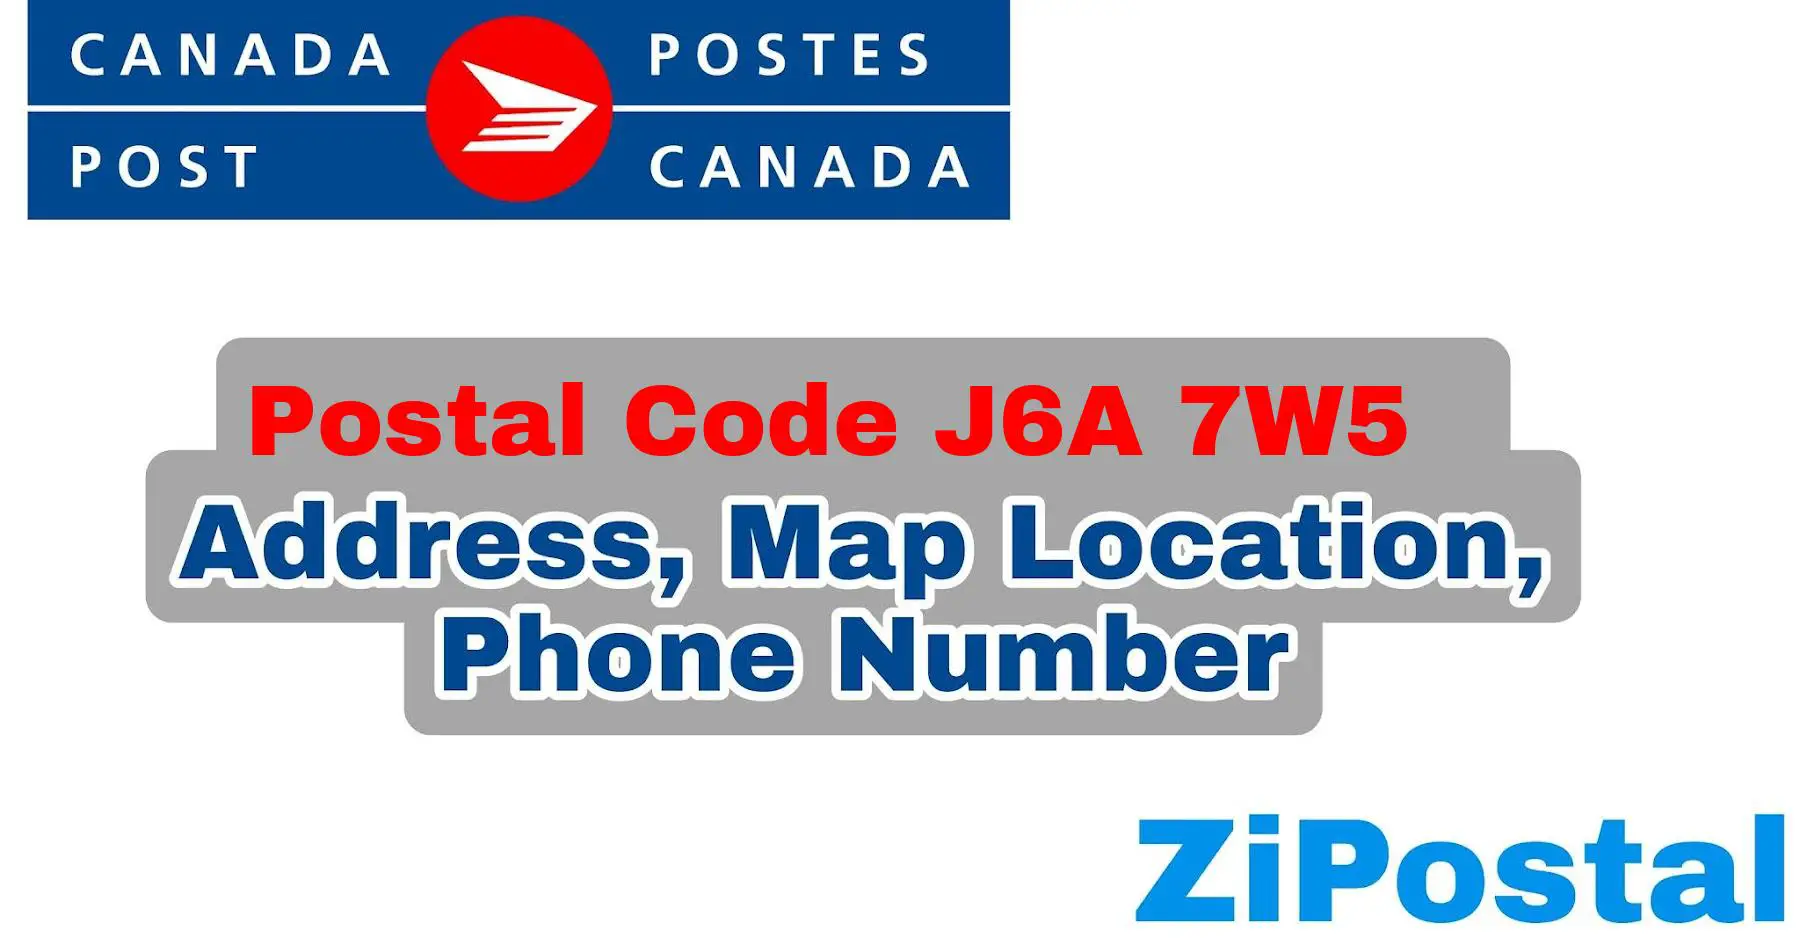 Postal Code J6A 7W5 Address Map Location and Phone Number